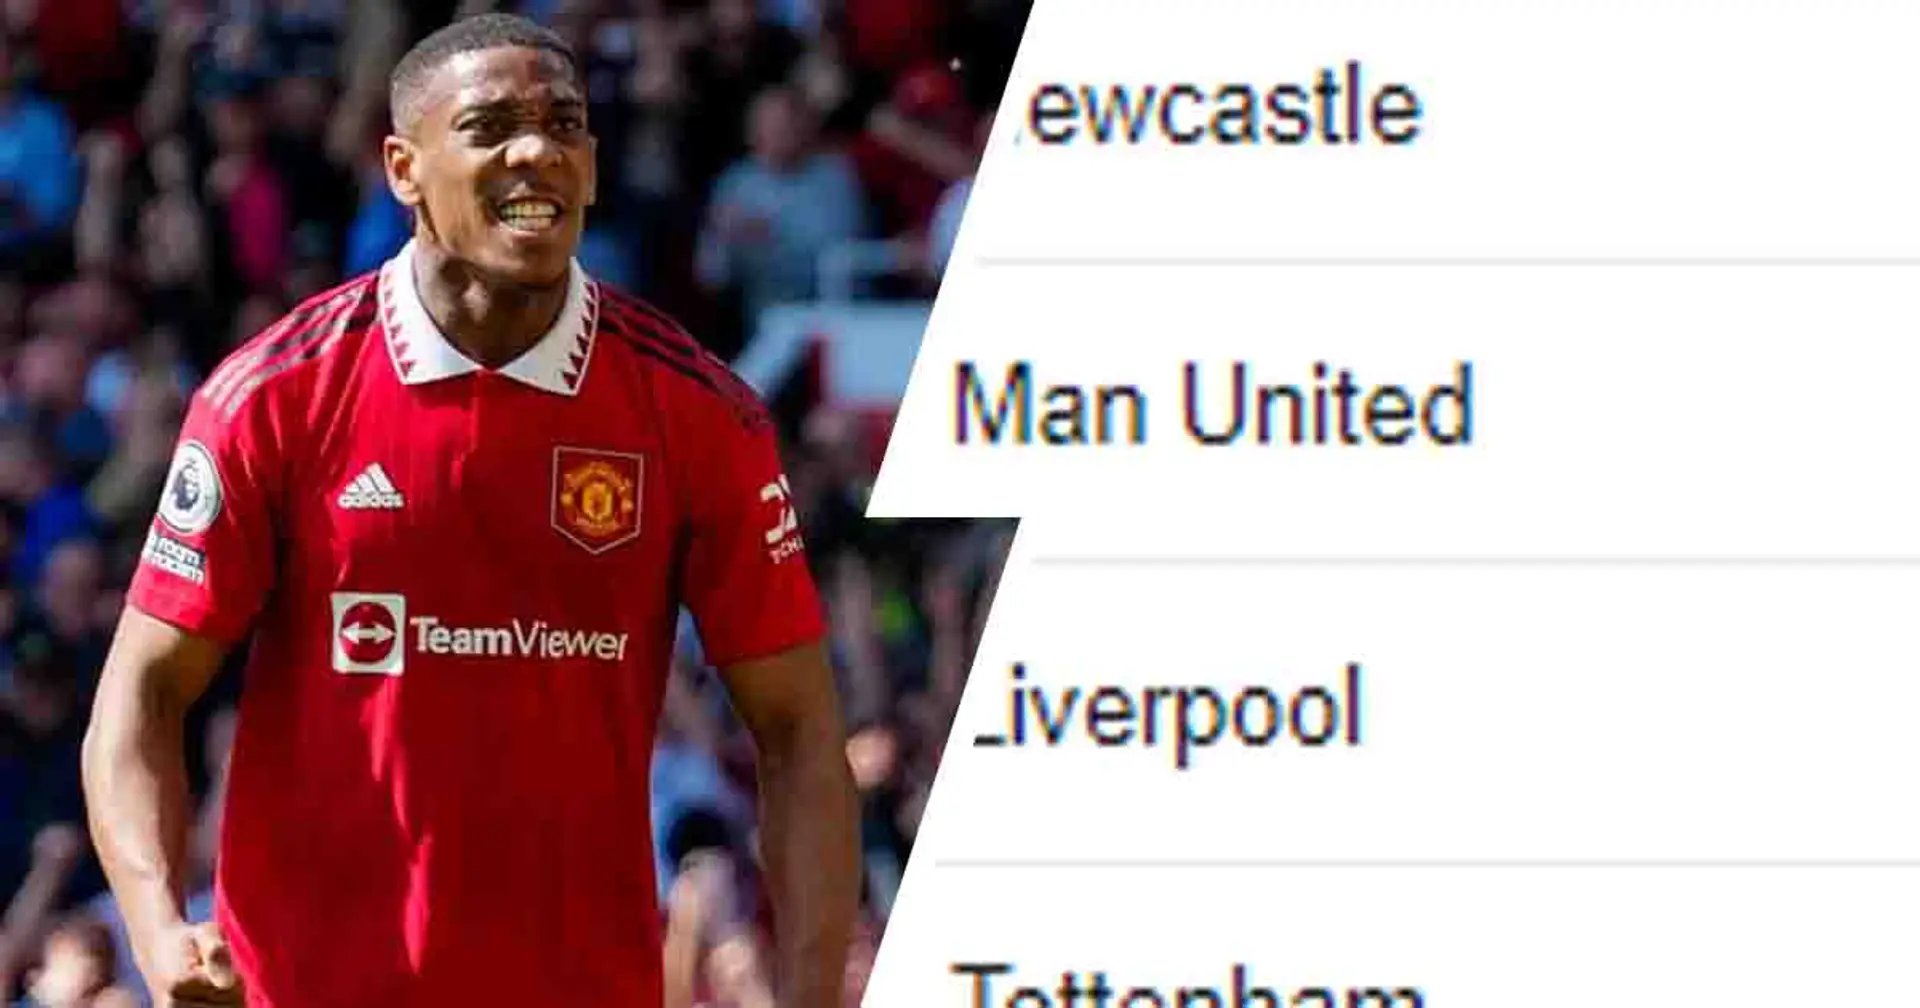 Man United tied with Newcastle again: latest Premier League standings after Wolves win